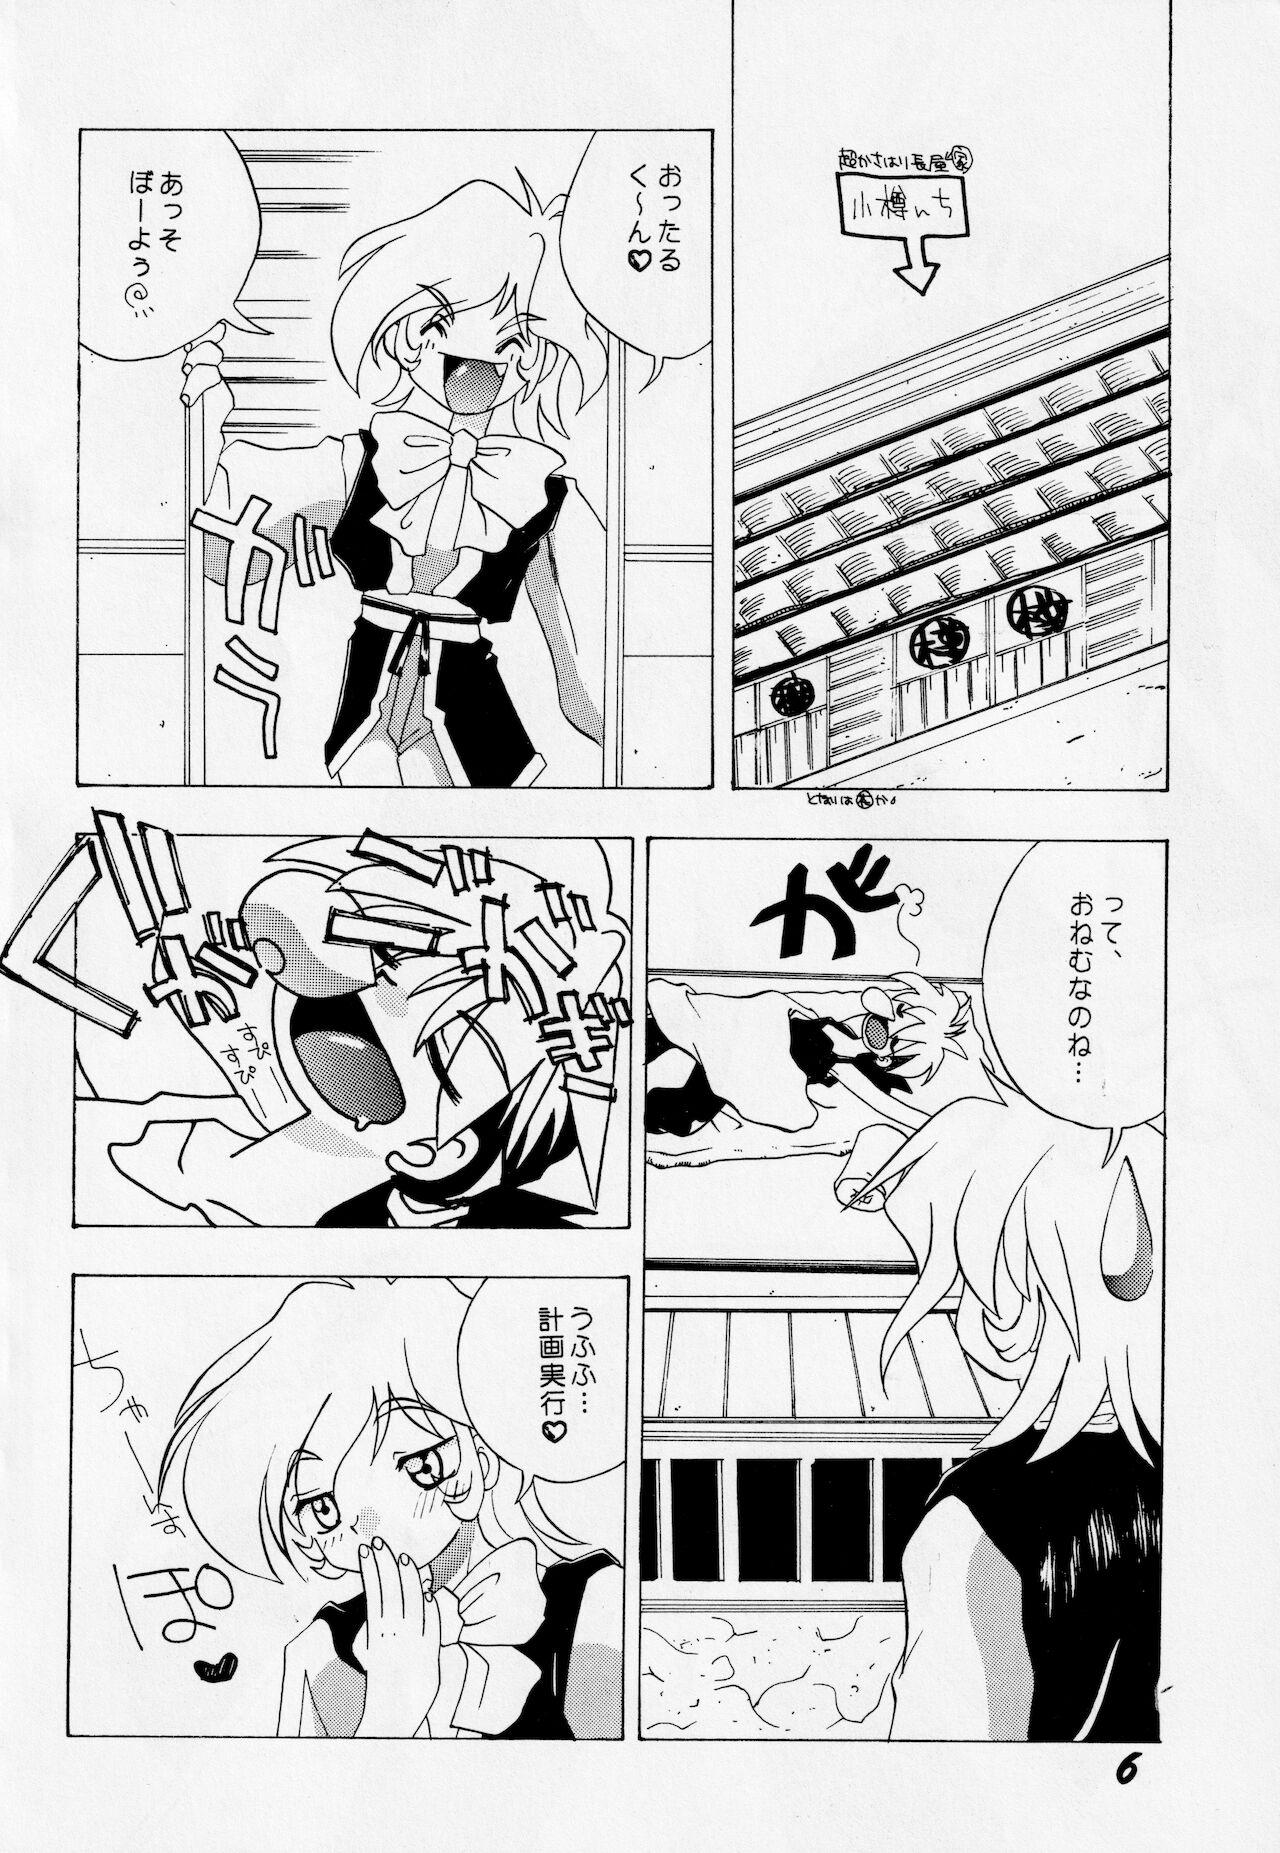 Long Hair Abaredaiko 2 - Saber marionette Sex Party - Page 5